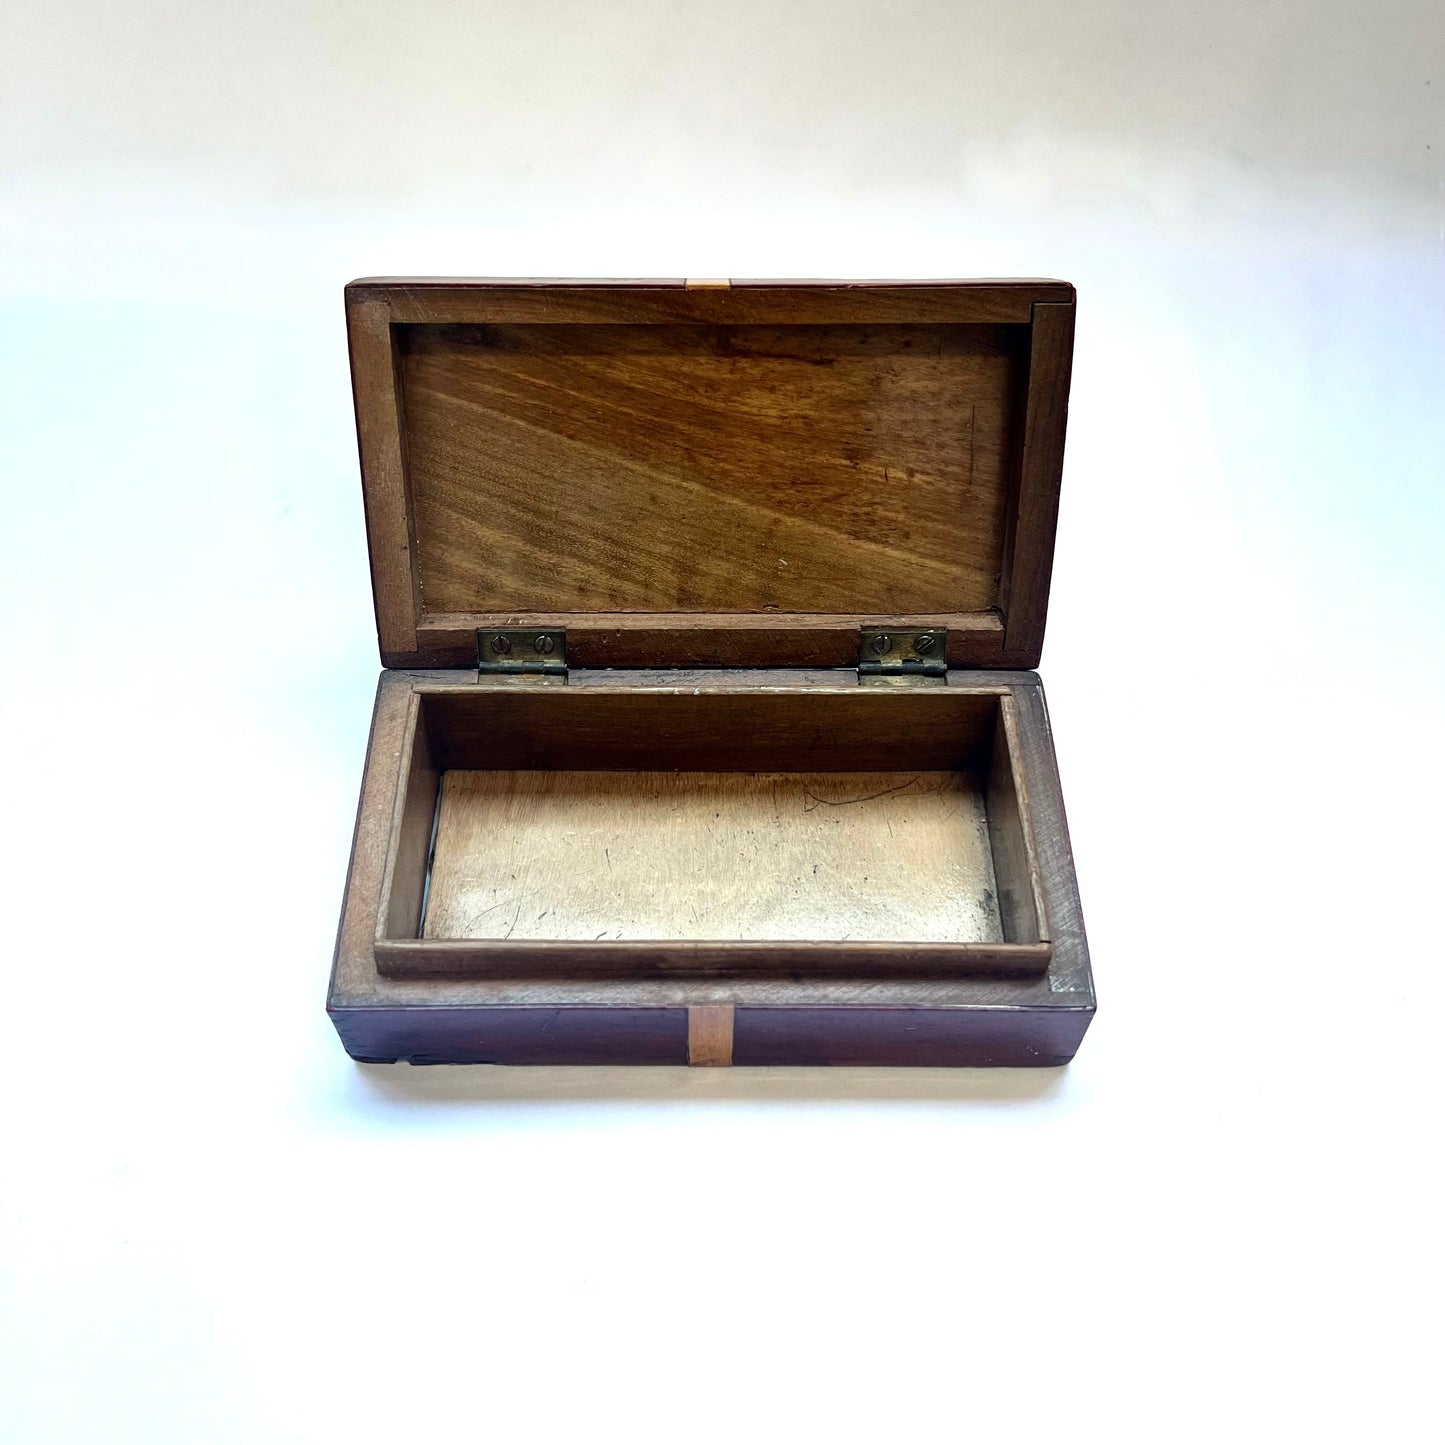 Antique English treenware box with unusual inlaid trompe l’oeil bow motif, Georgian to early Victorian